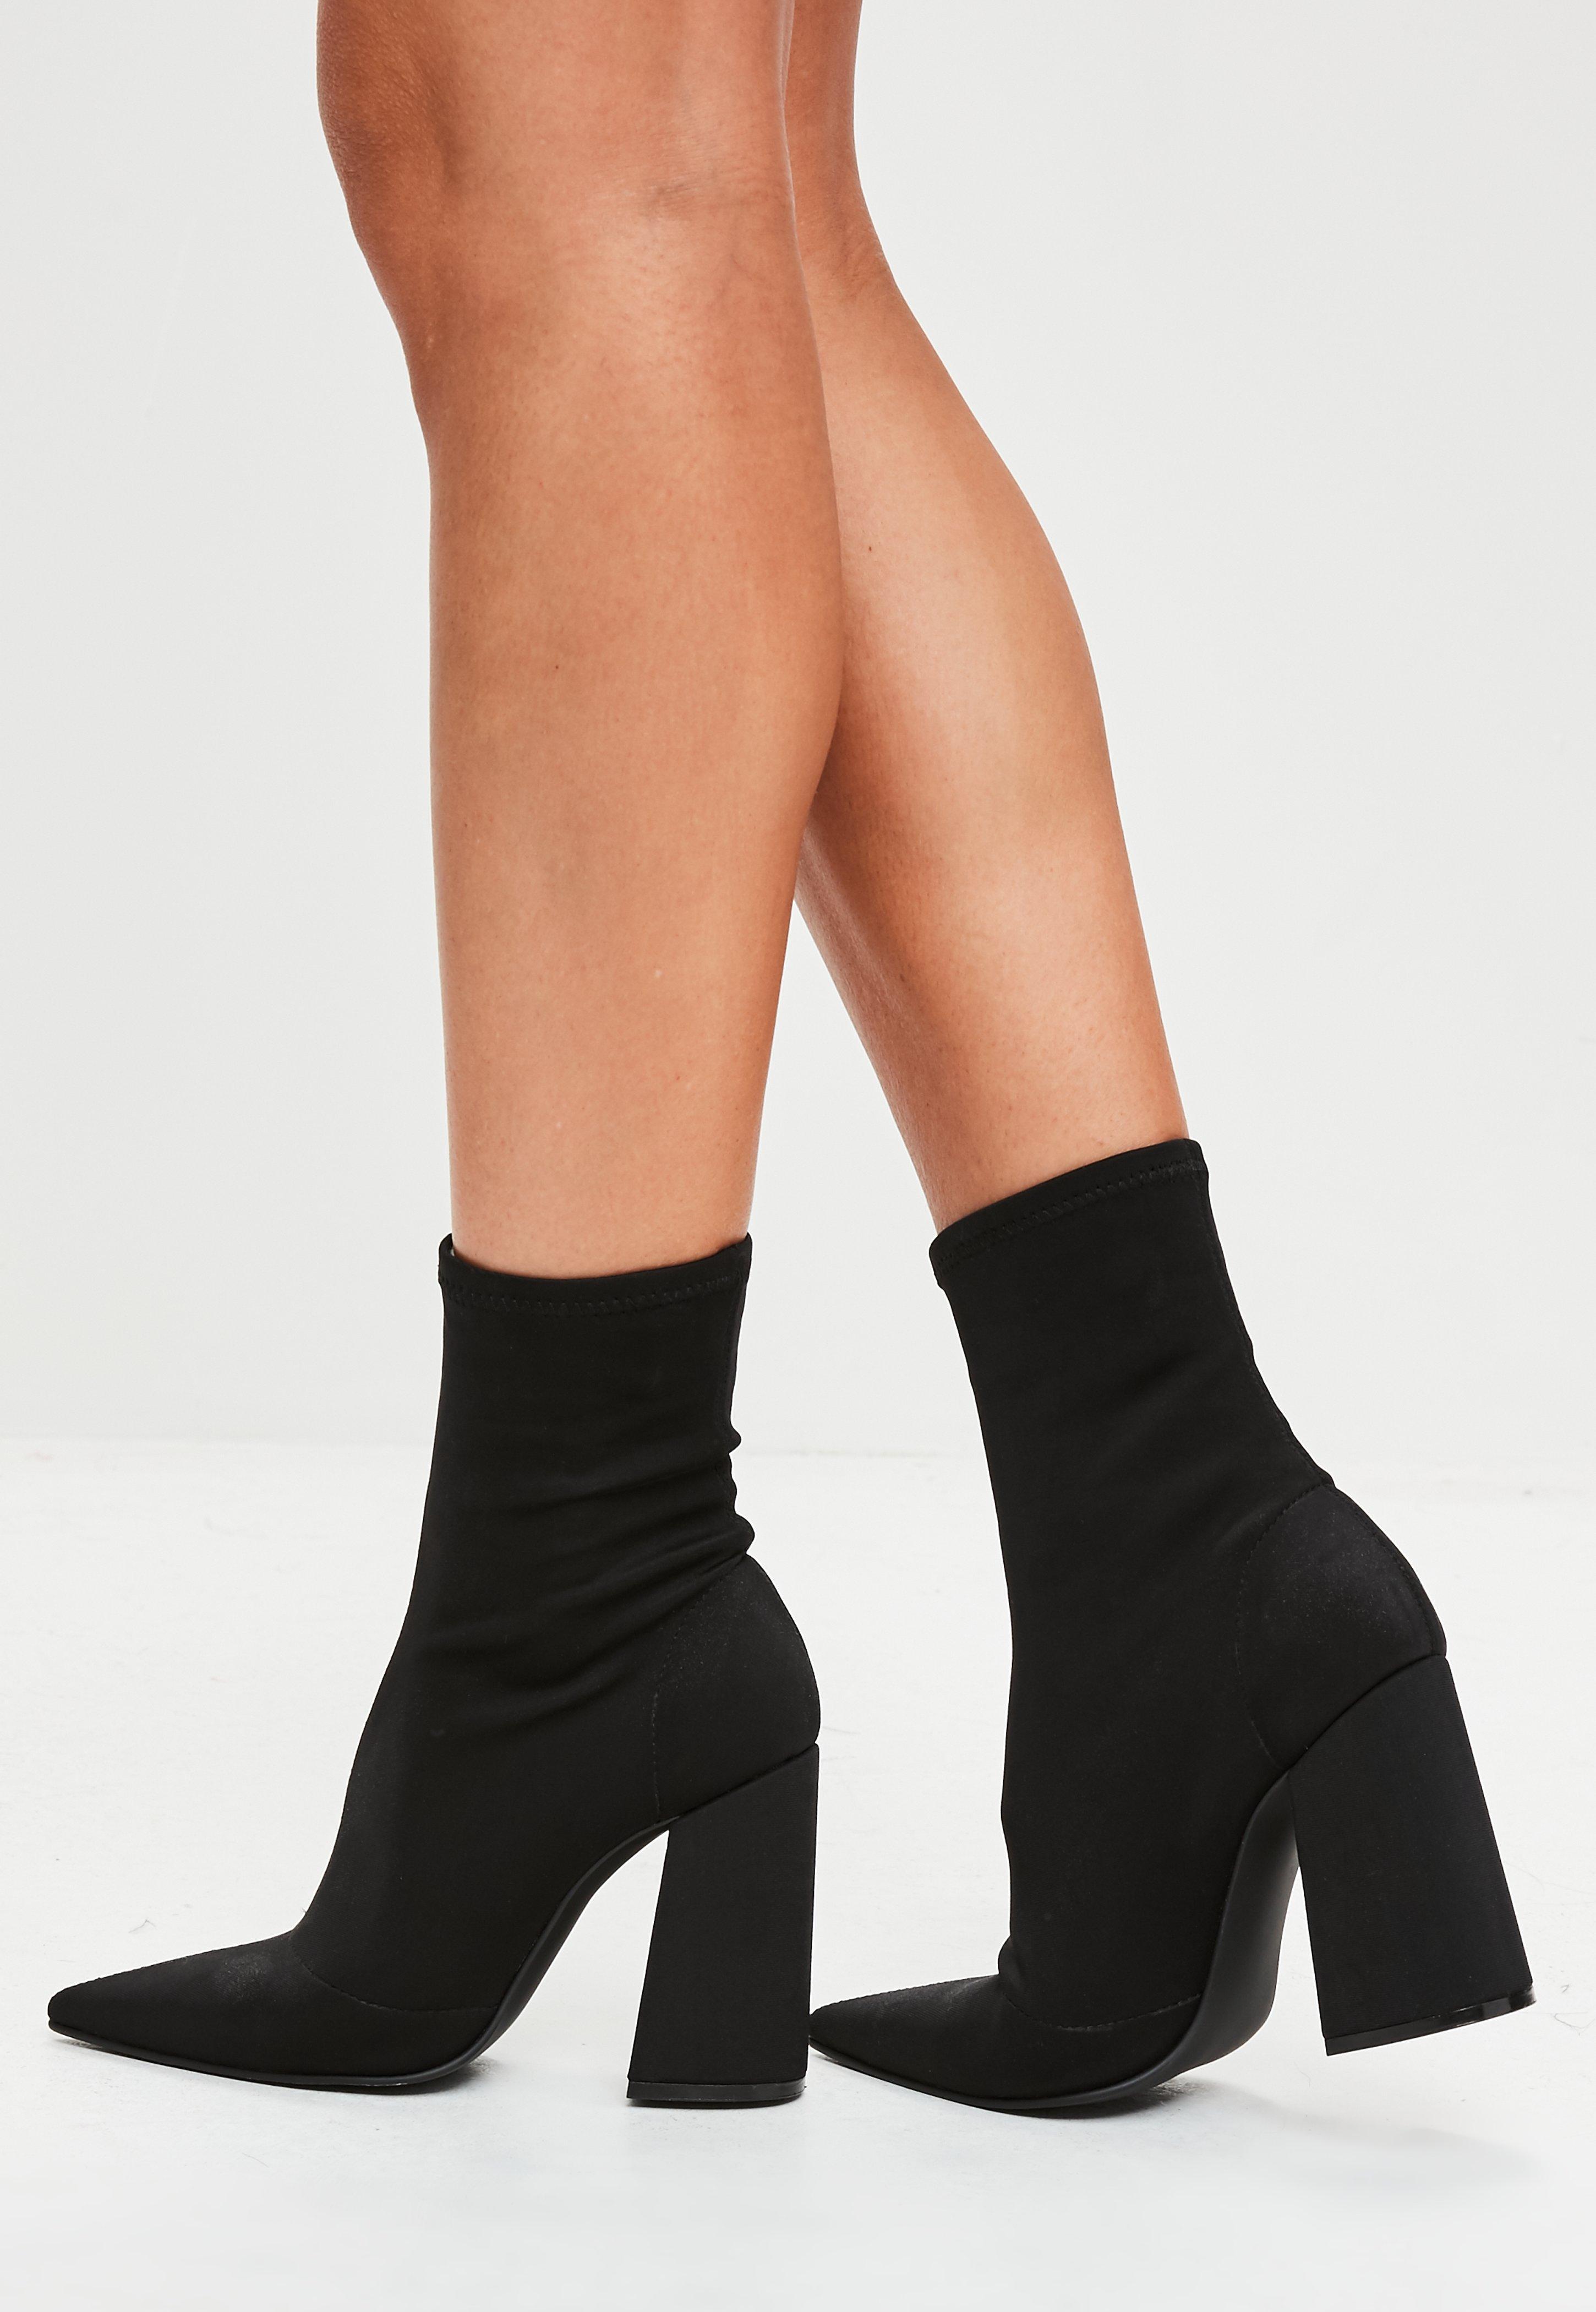 Missguided Black Flared Heel Sock Boots 